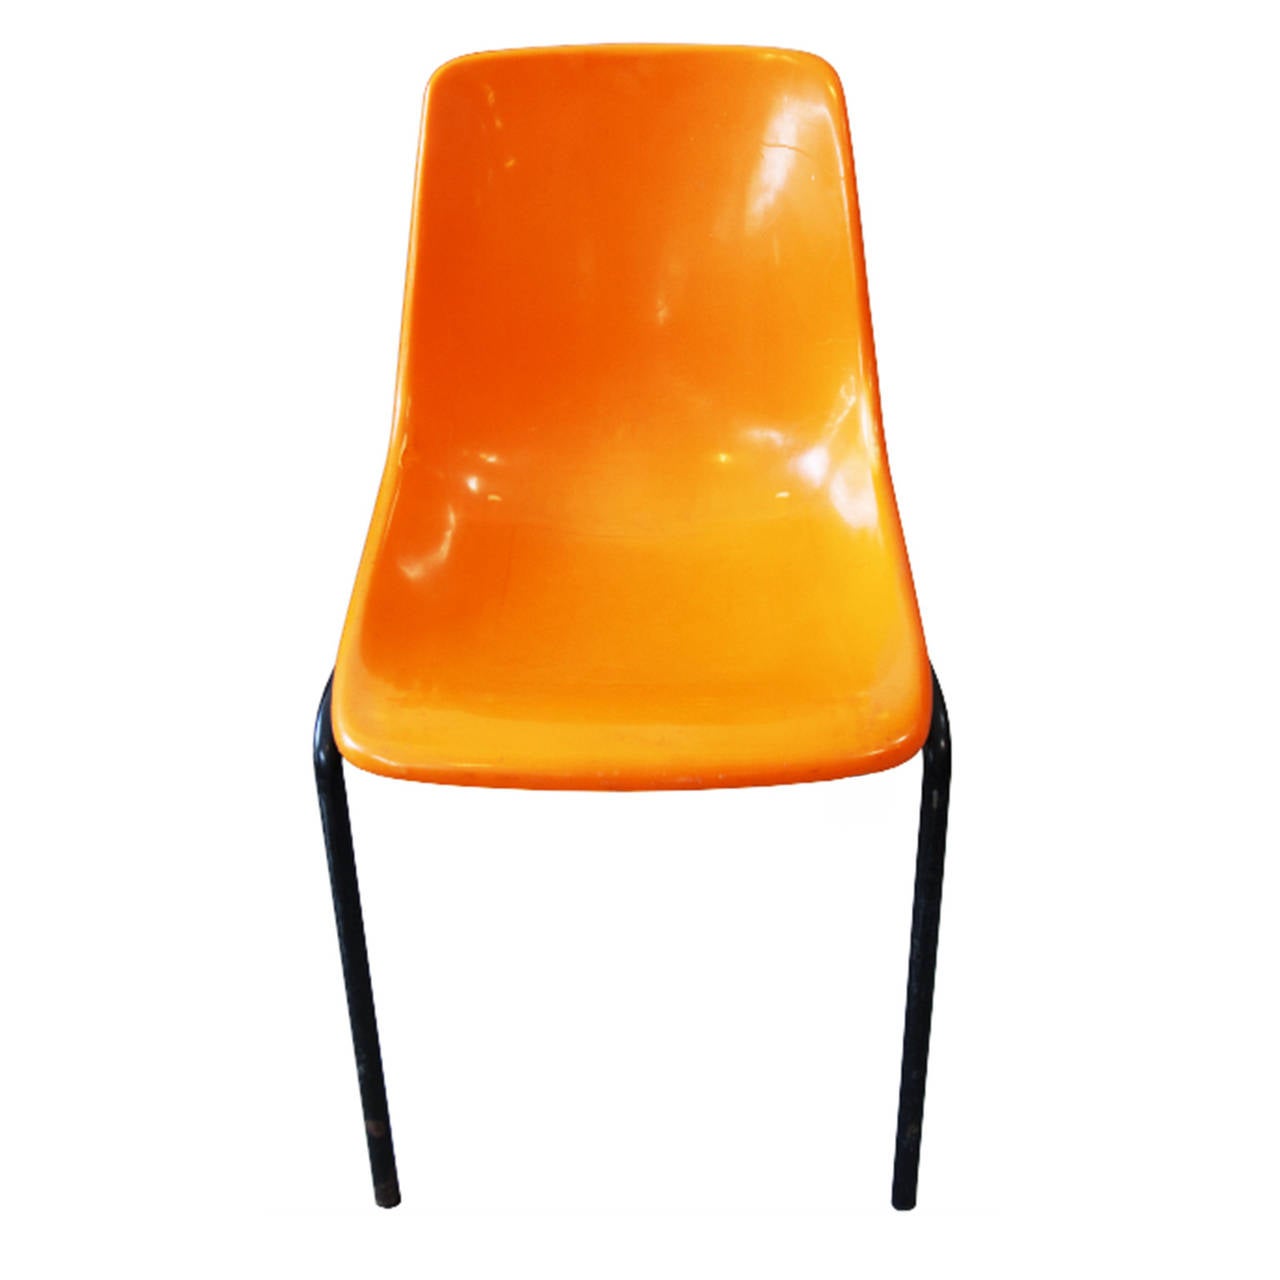 Set of 12 vintage mid century orange plastic and black painted metal stackable chairs from the French National Guard. Circa 1970